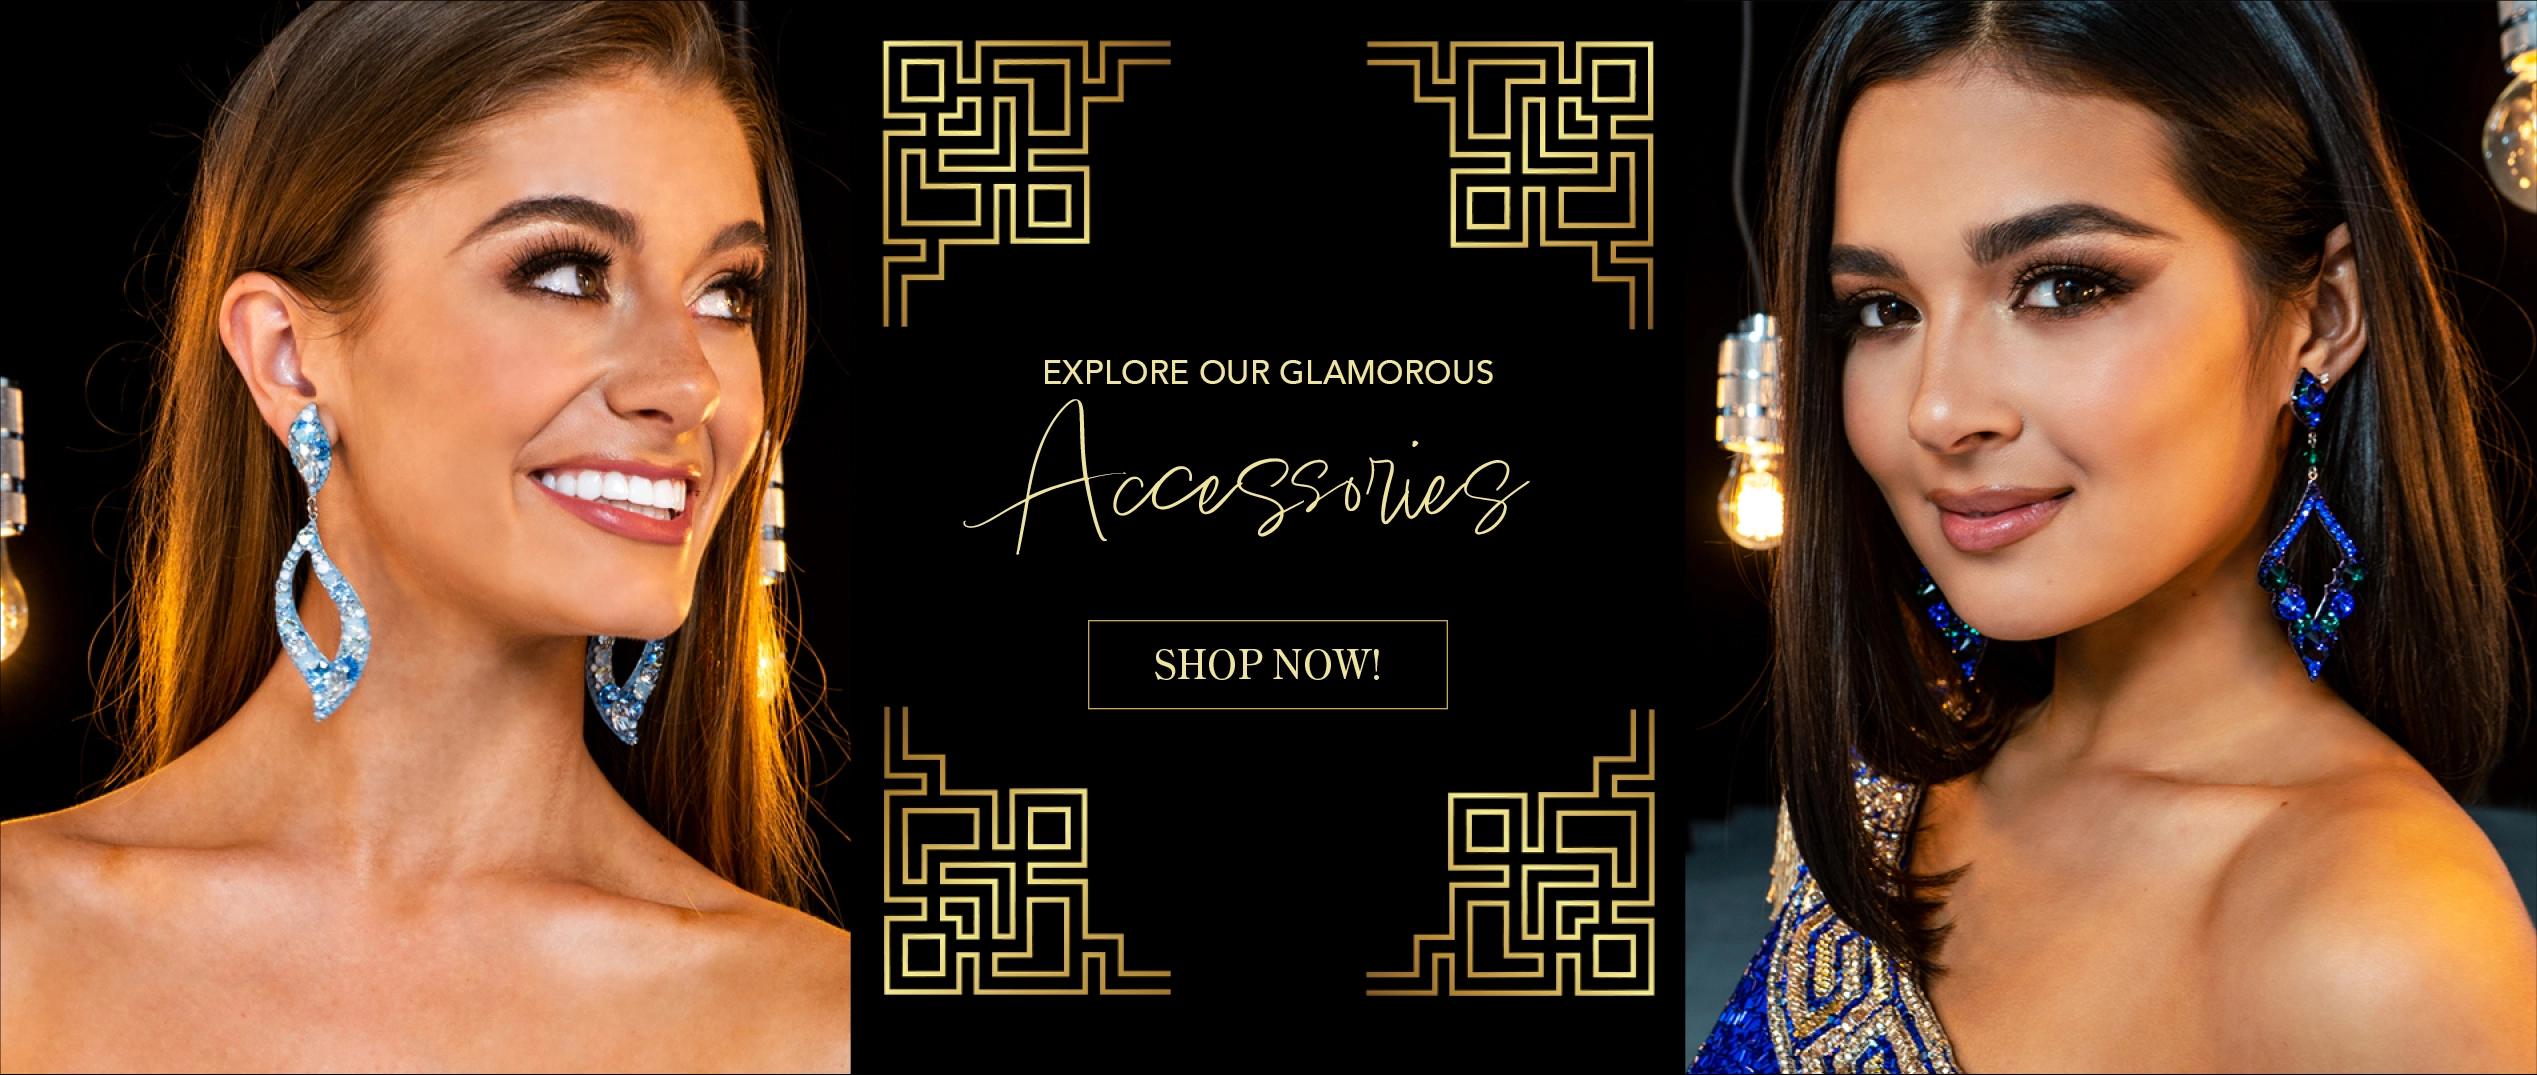 Explore our glamorous accessories!